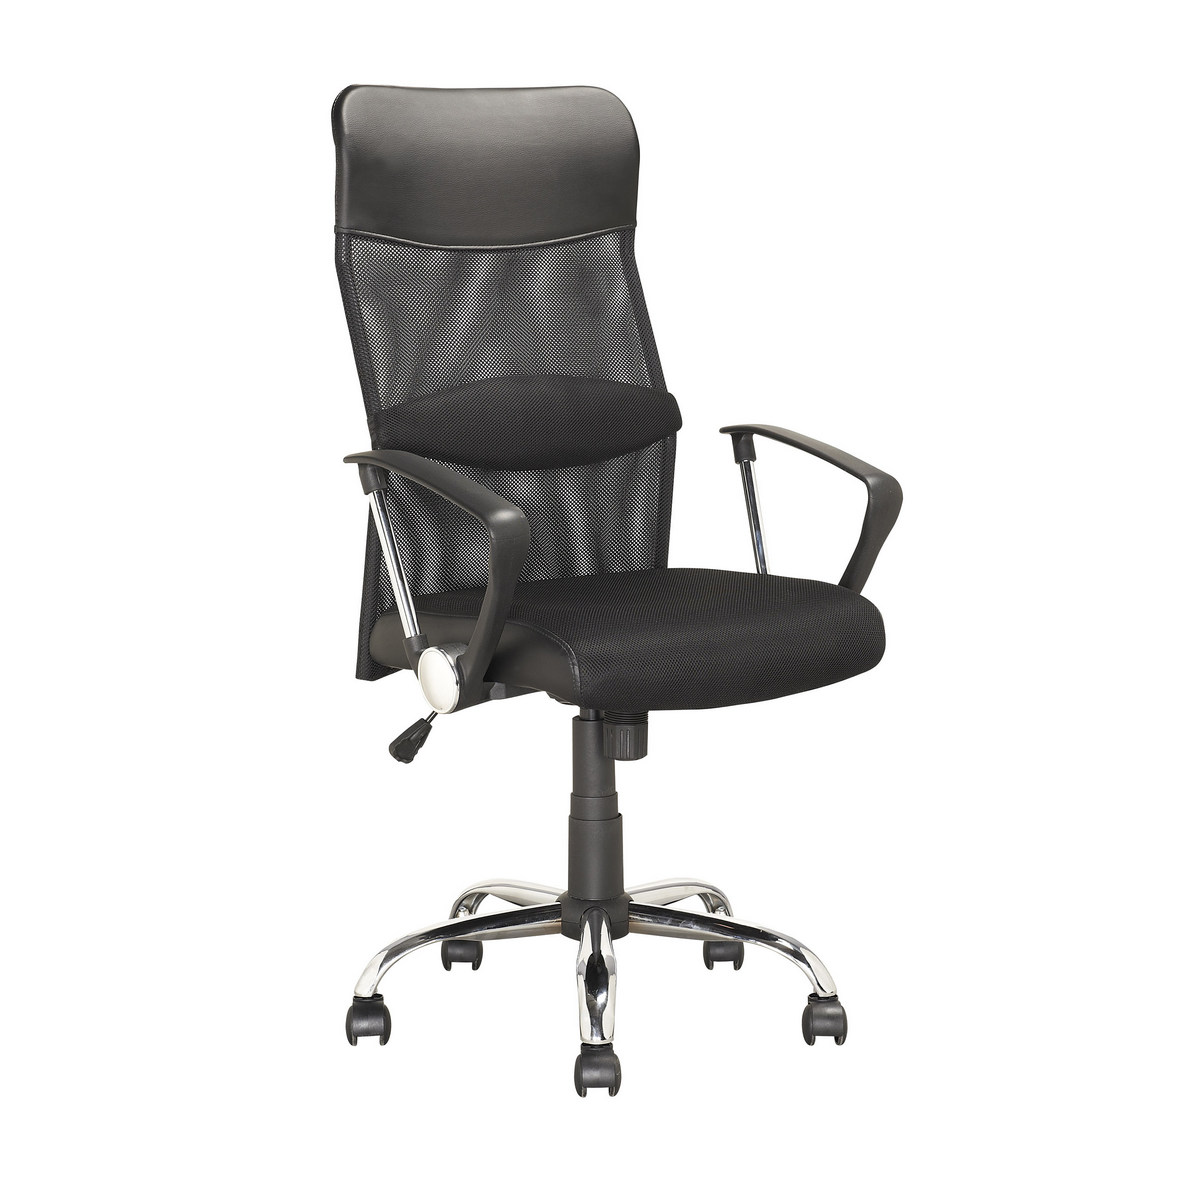 Corliving Lof-908-o Workspace Executive Office Chair In Black Leatherette & Mesh